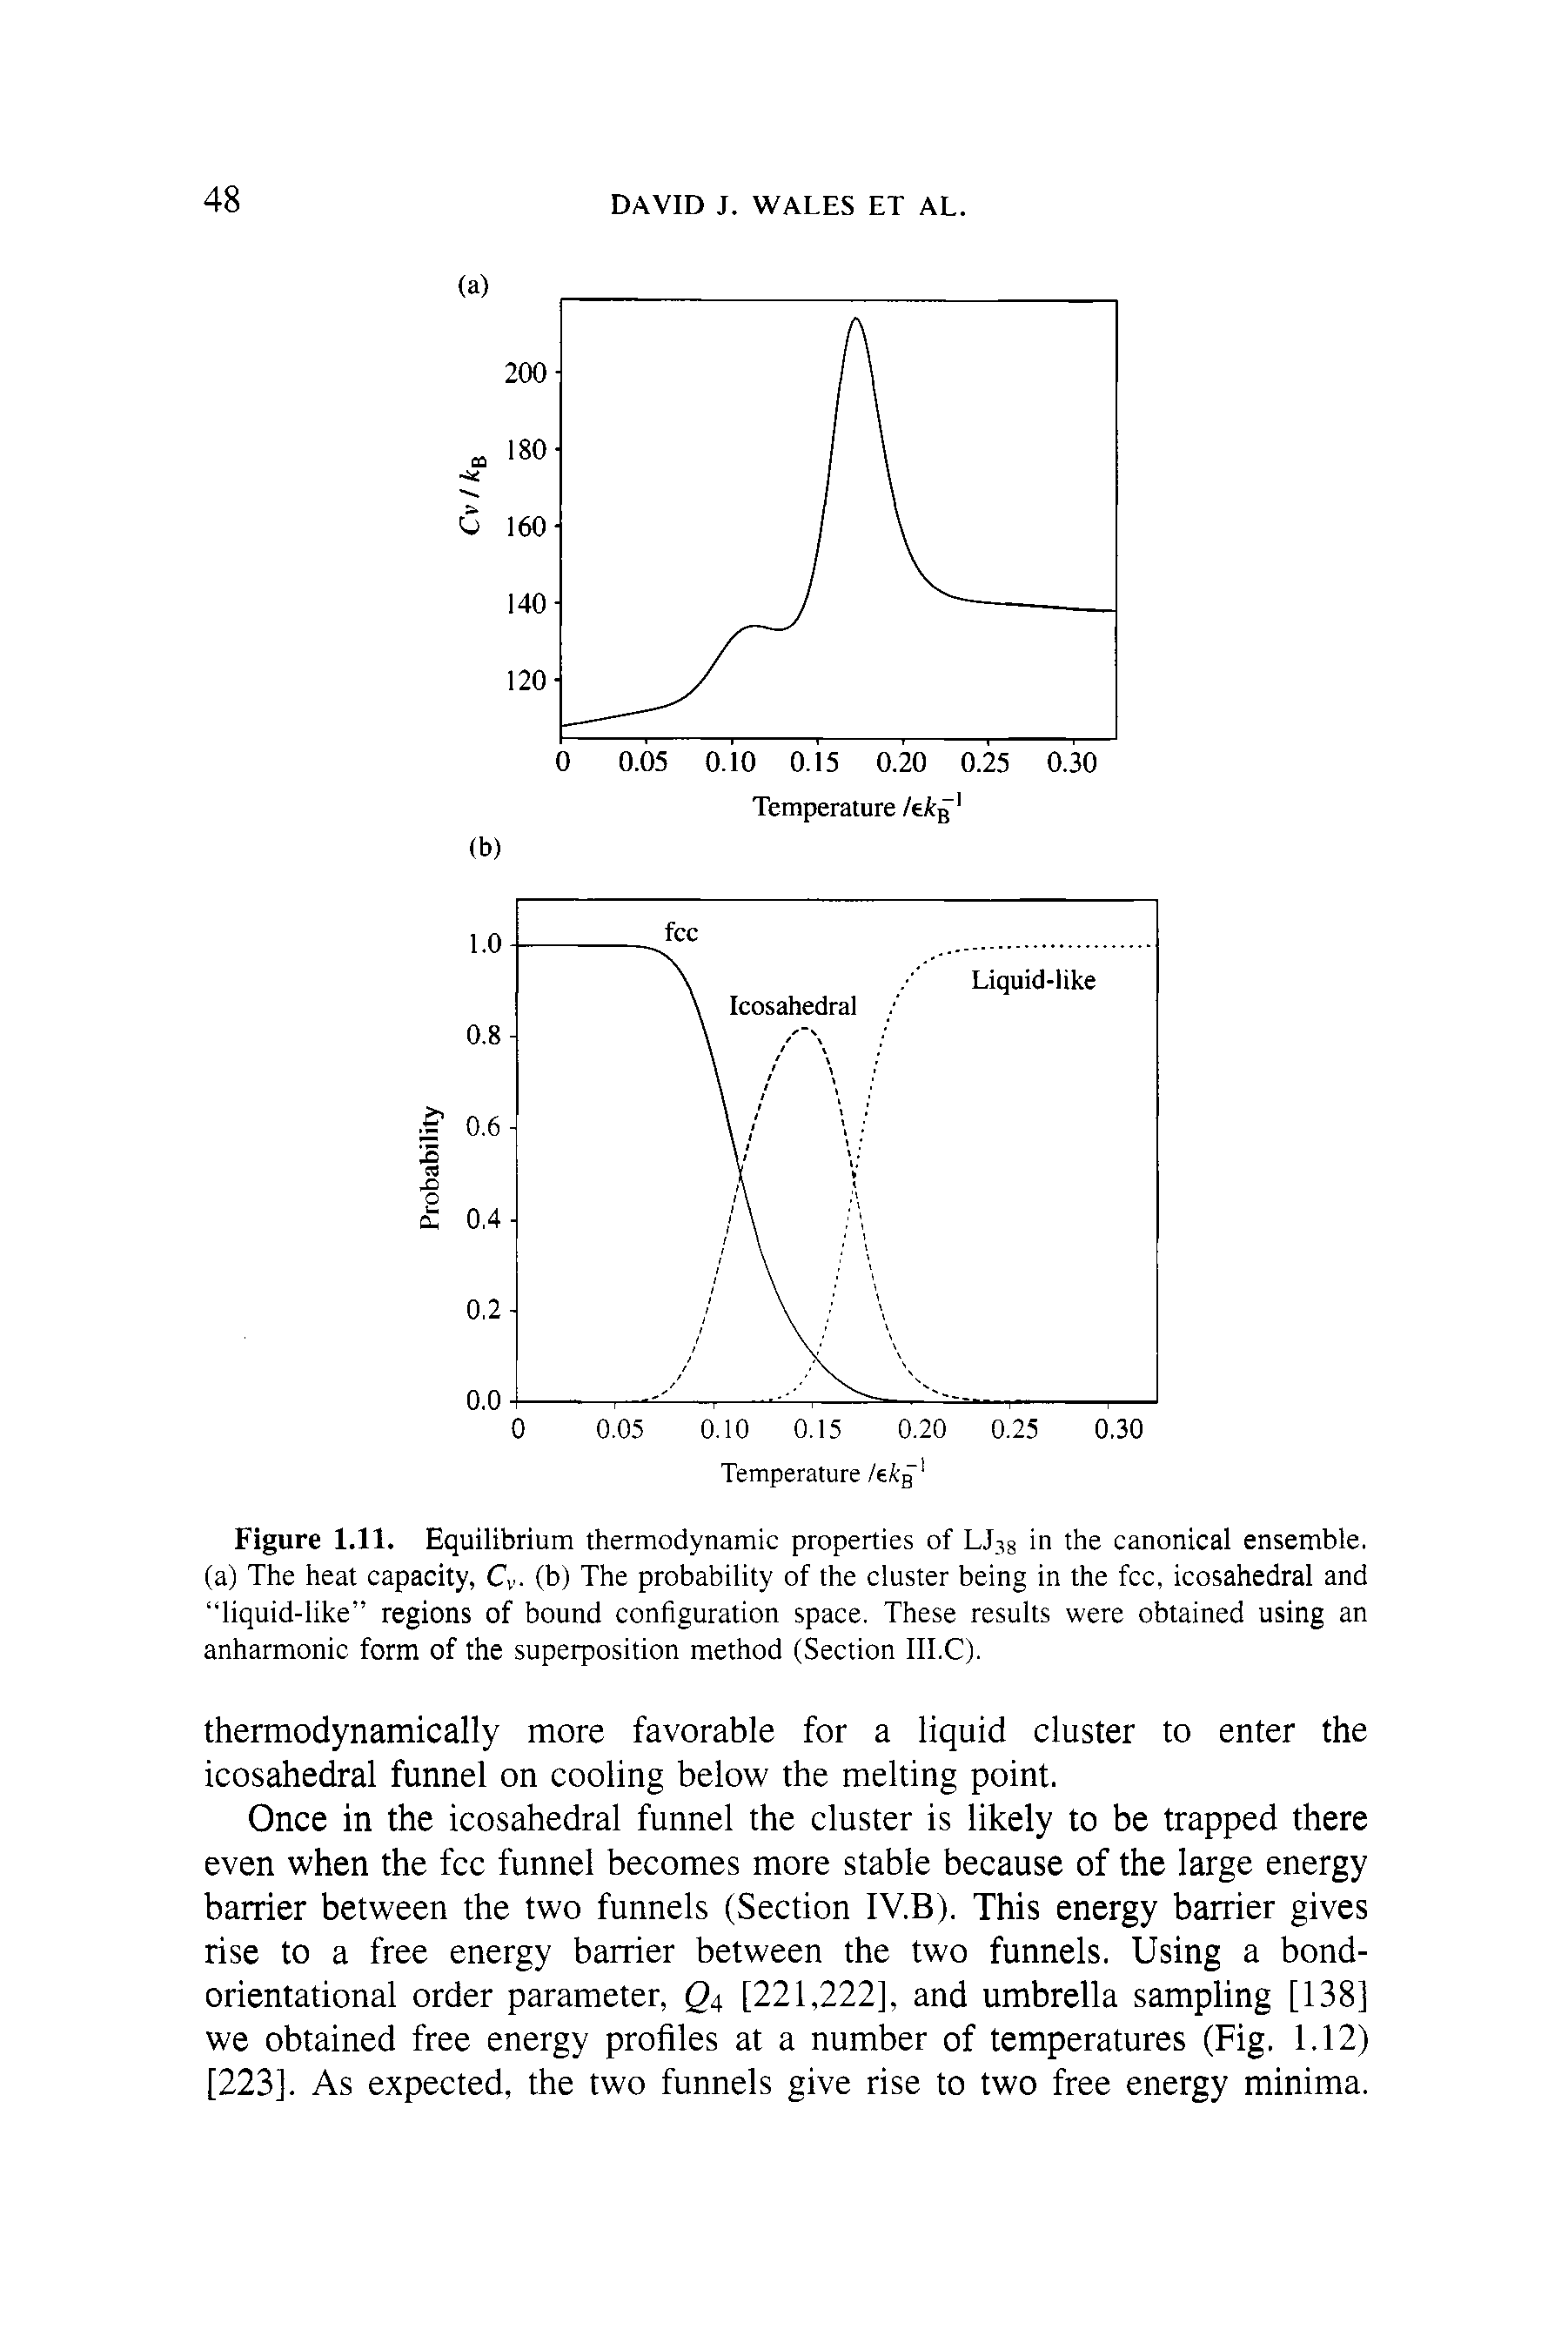 Figure 1.11. Equilibrium thermodynamic properties of LJ38 in the canonical ensemble, (a) The heat capacity, Cv (b) The probability of the cluster being in the fee, icosahedral and liquid-like regions of bound configuration space. These results were obtained using an anharmonic form of the superposition method (Section III.C).